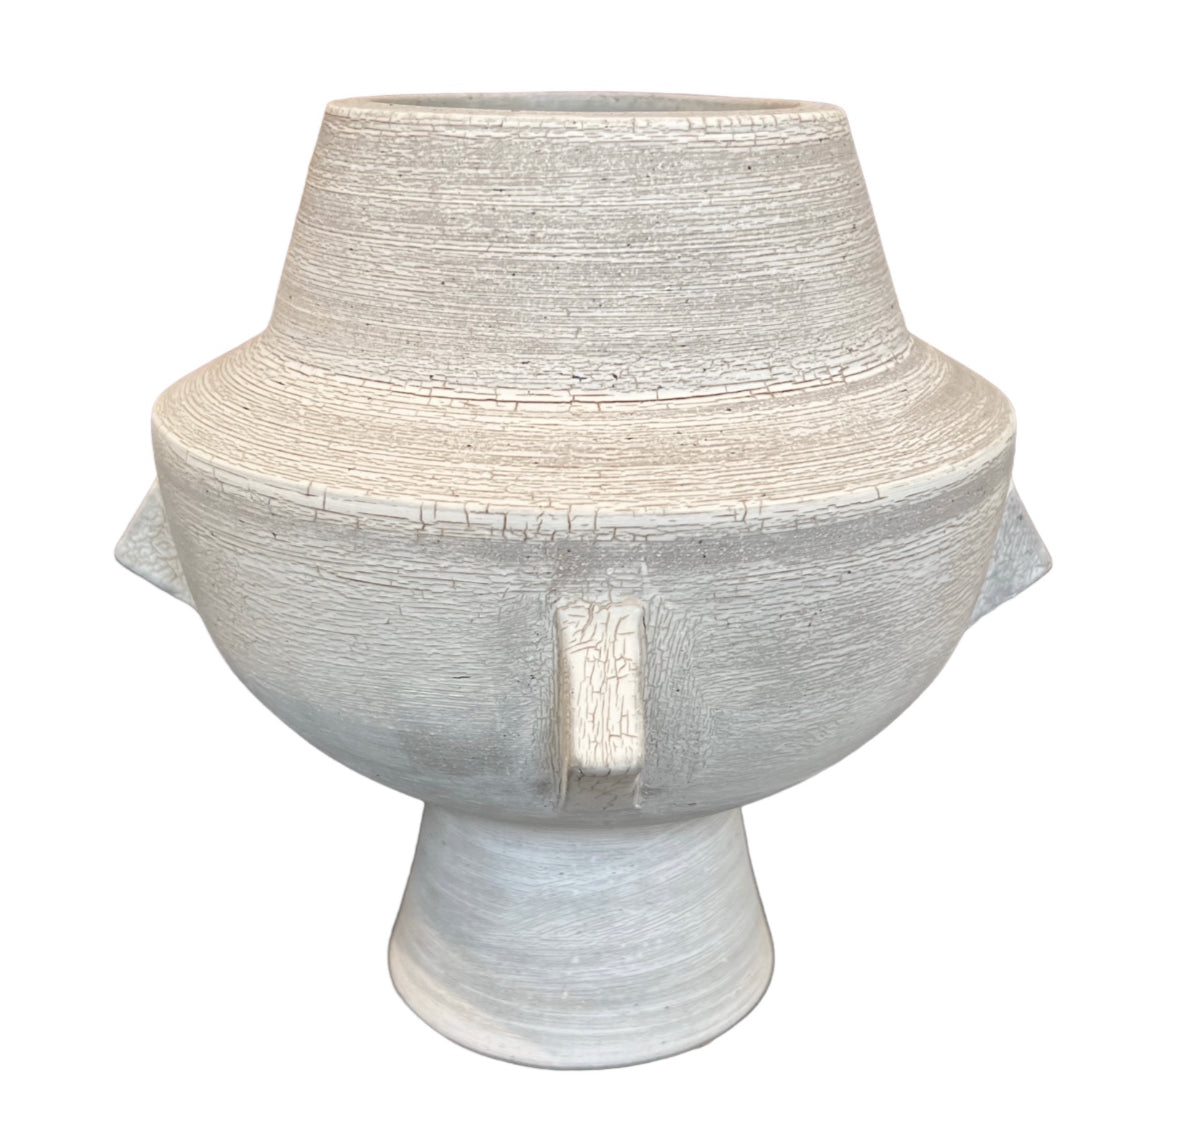 Shaped Stoneware Vase with Fins